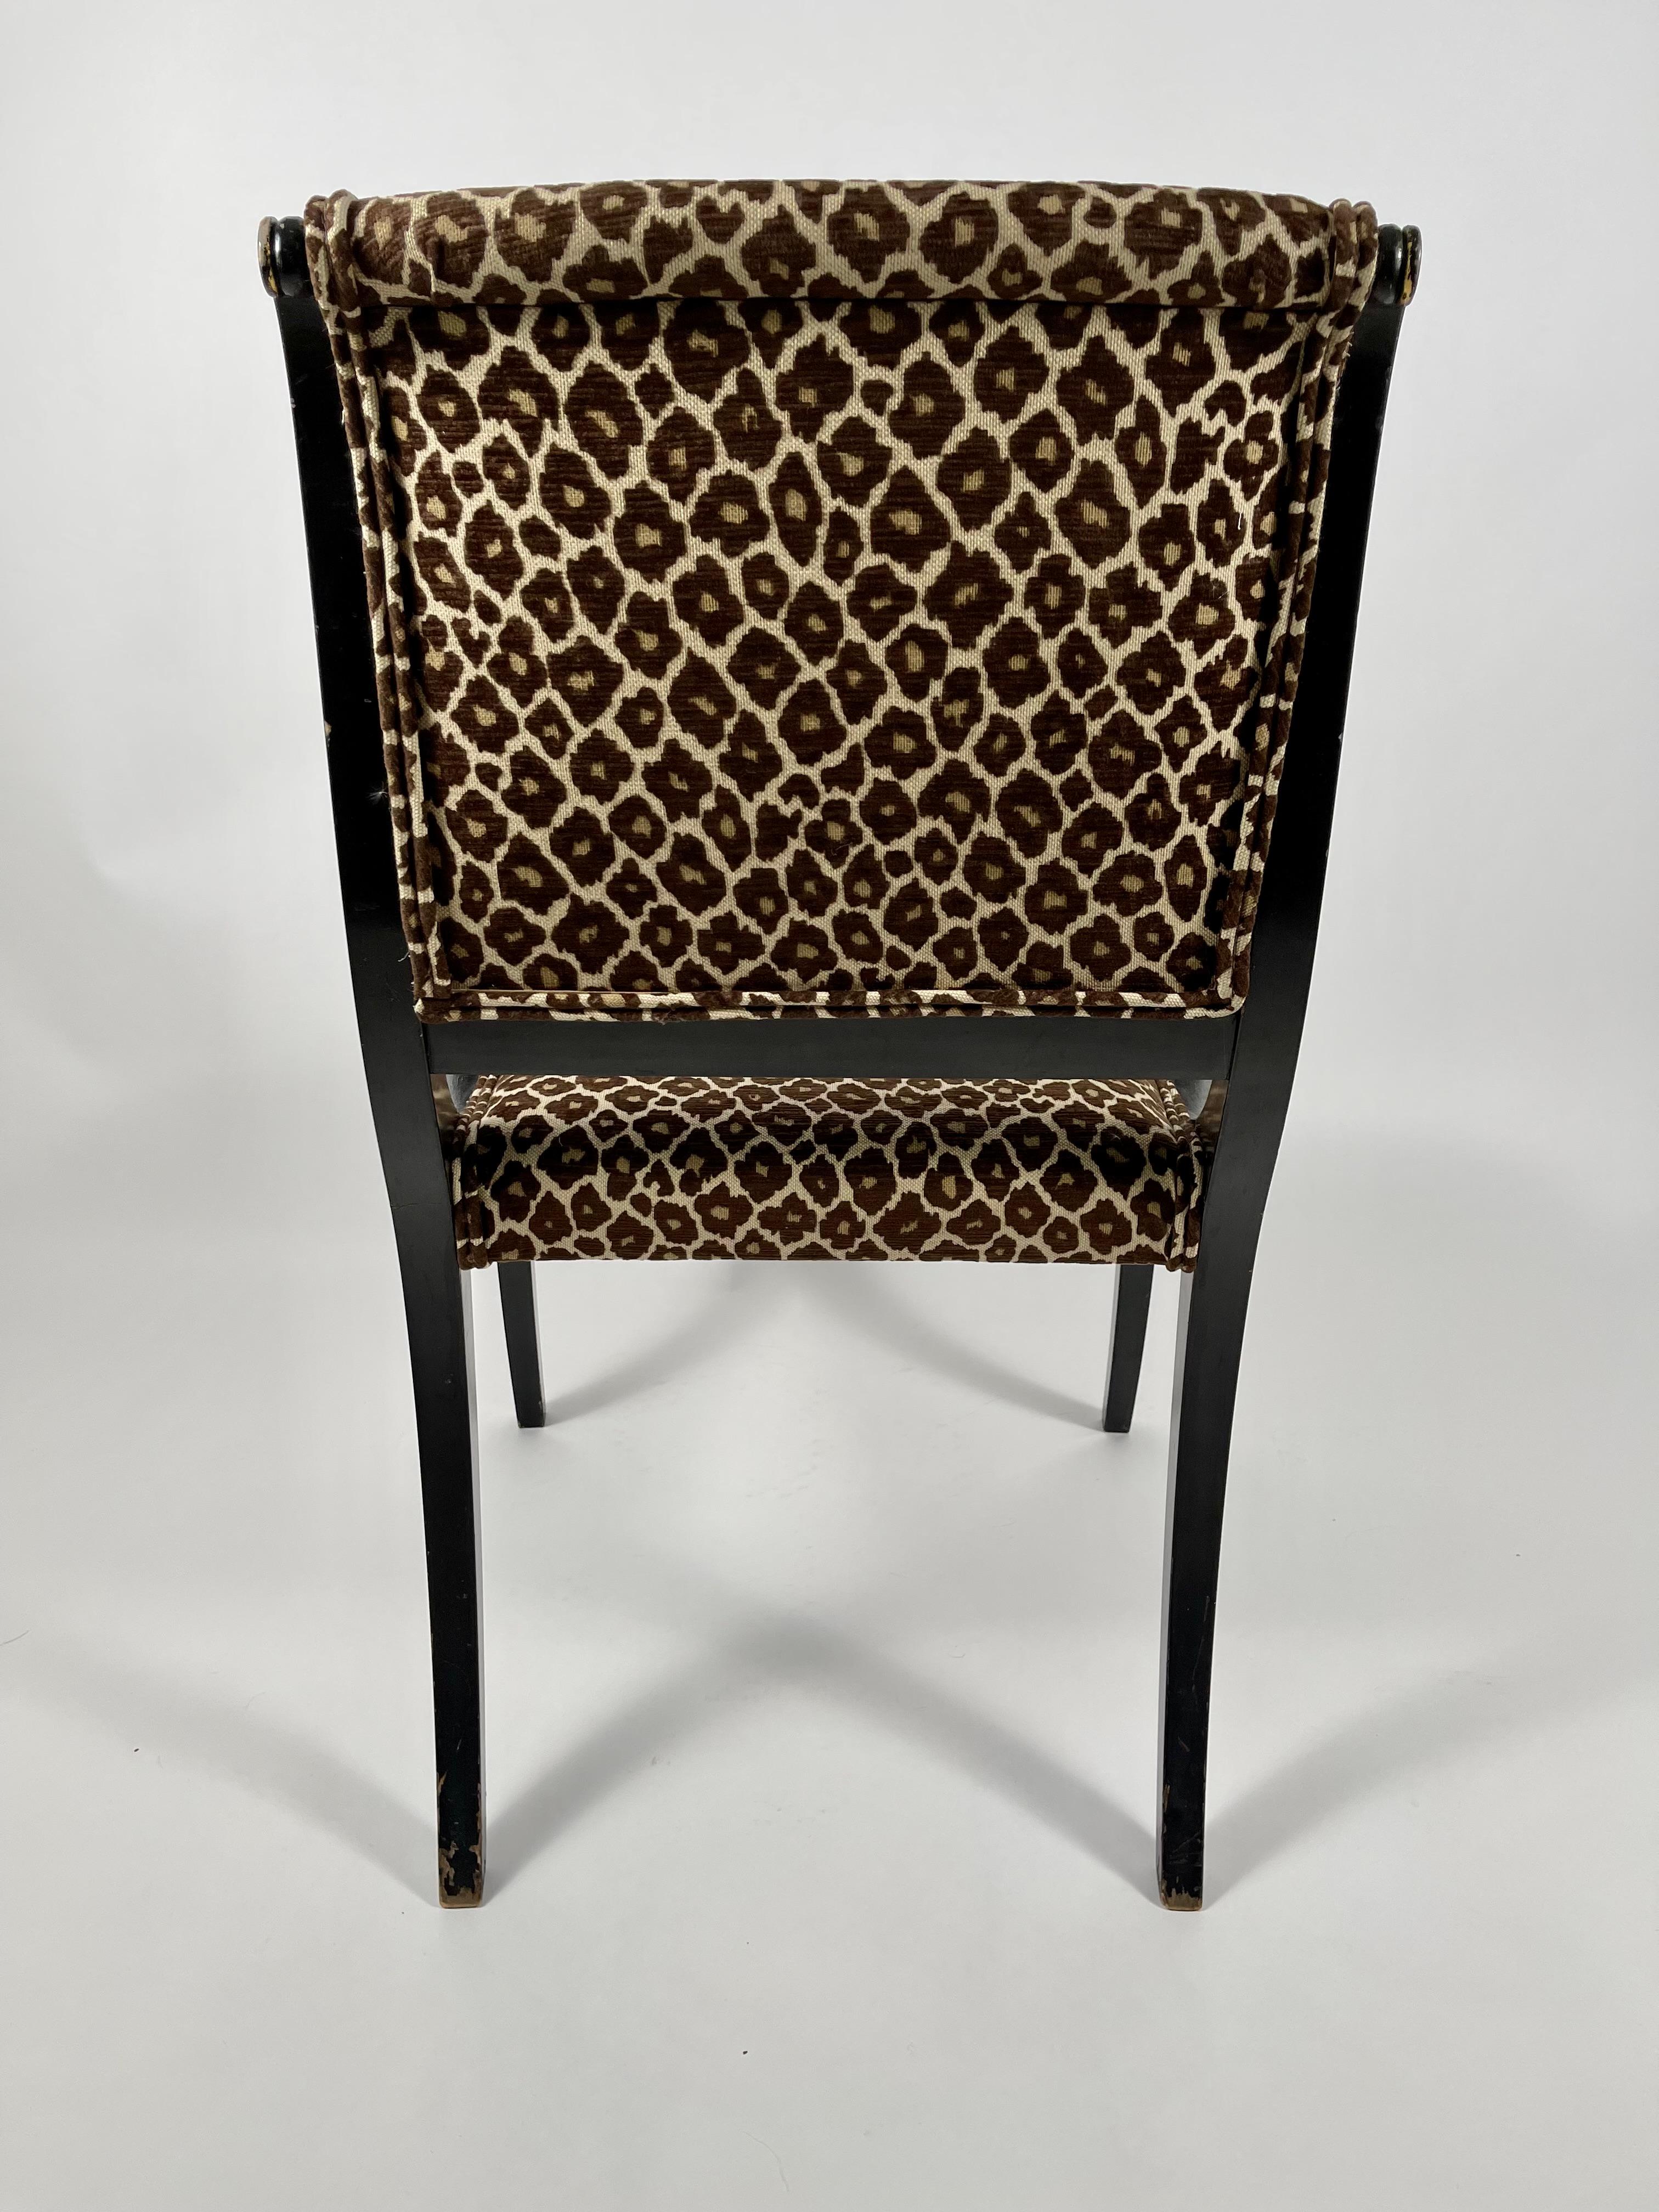 Hardwood Regency Style Neoclassical Ebonized and Parcel Gilt Upholstered Arm Chair